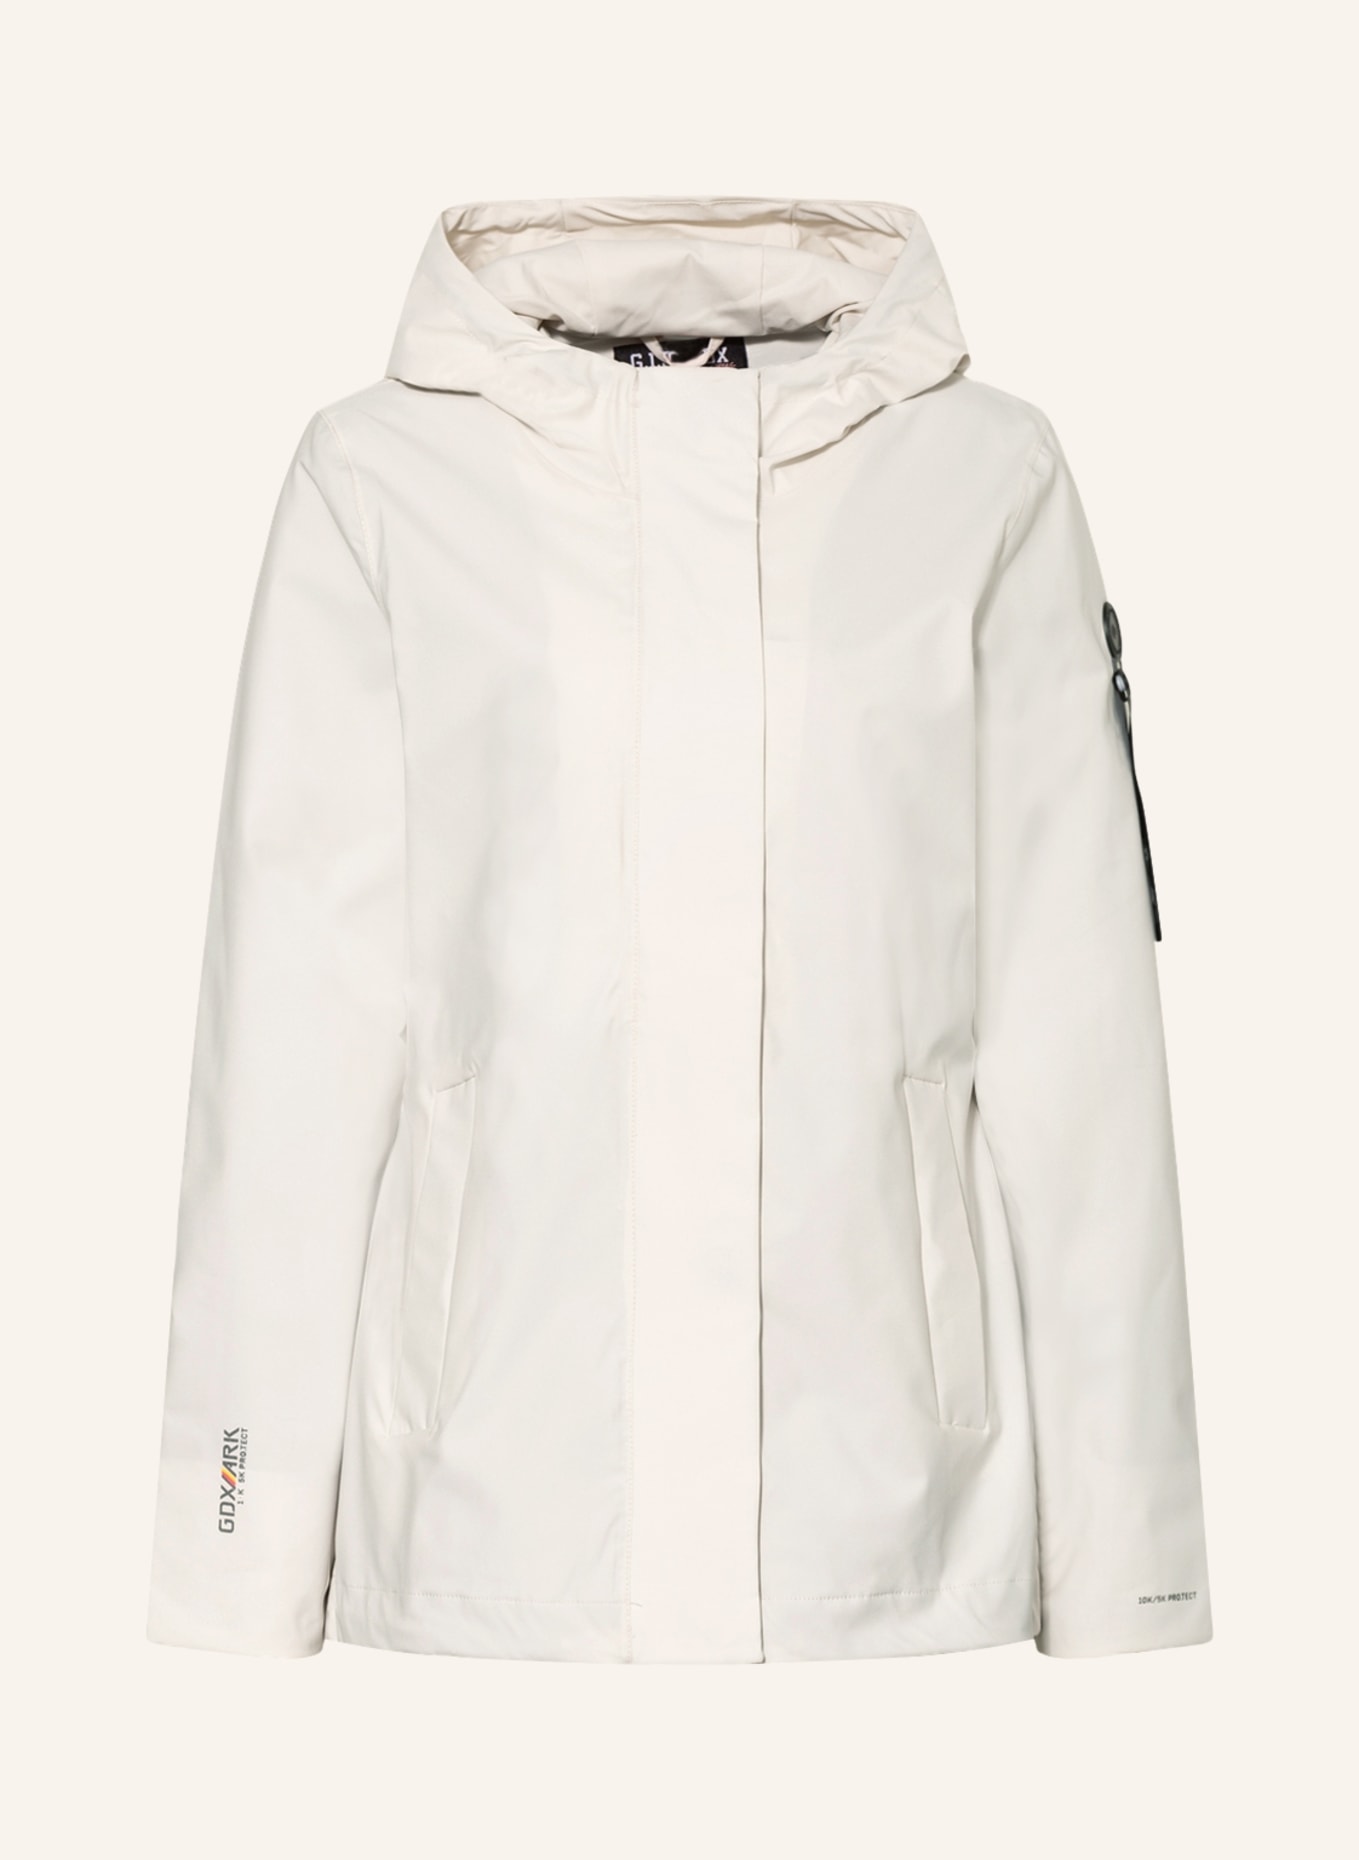 cream in by 152 jacket DX GS Outdoor killtec G.I.G.A.